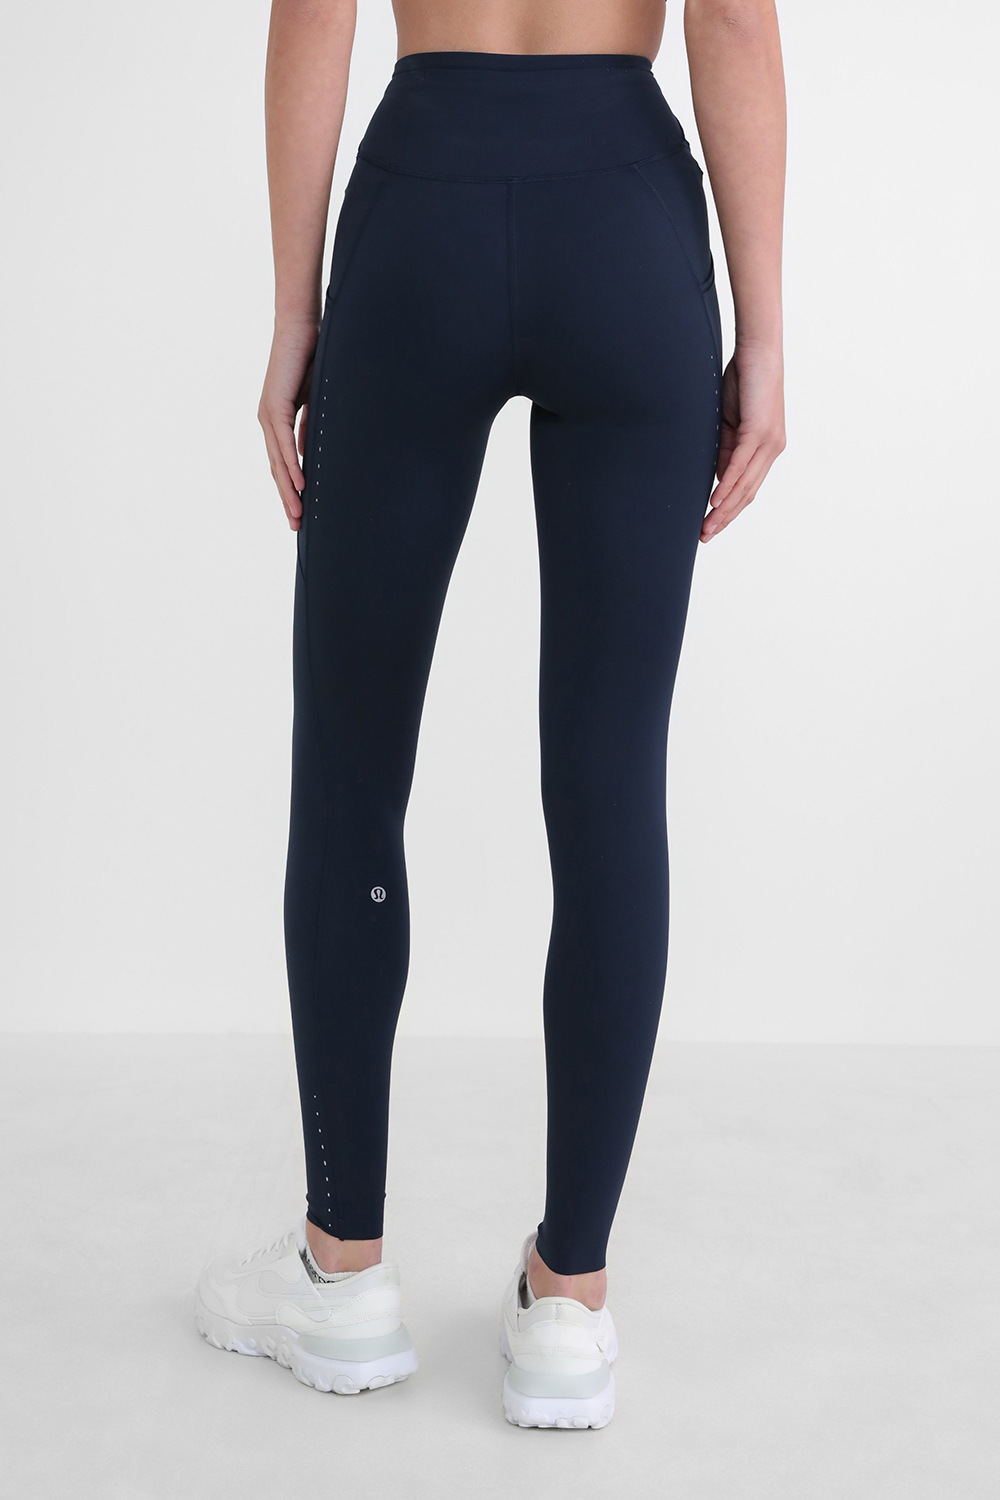 Fast and Free High-Rise Tight 28” Pockets LULULEMON